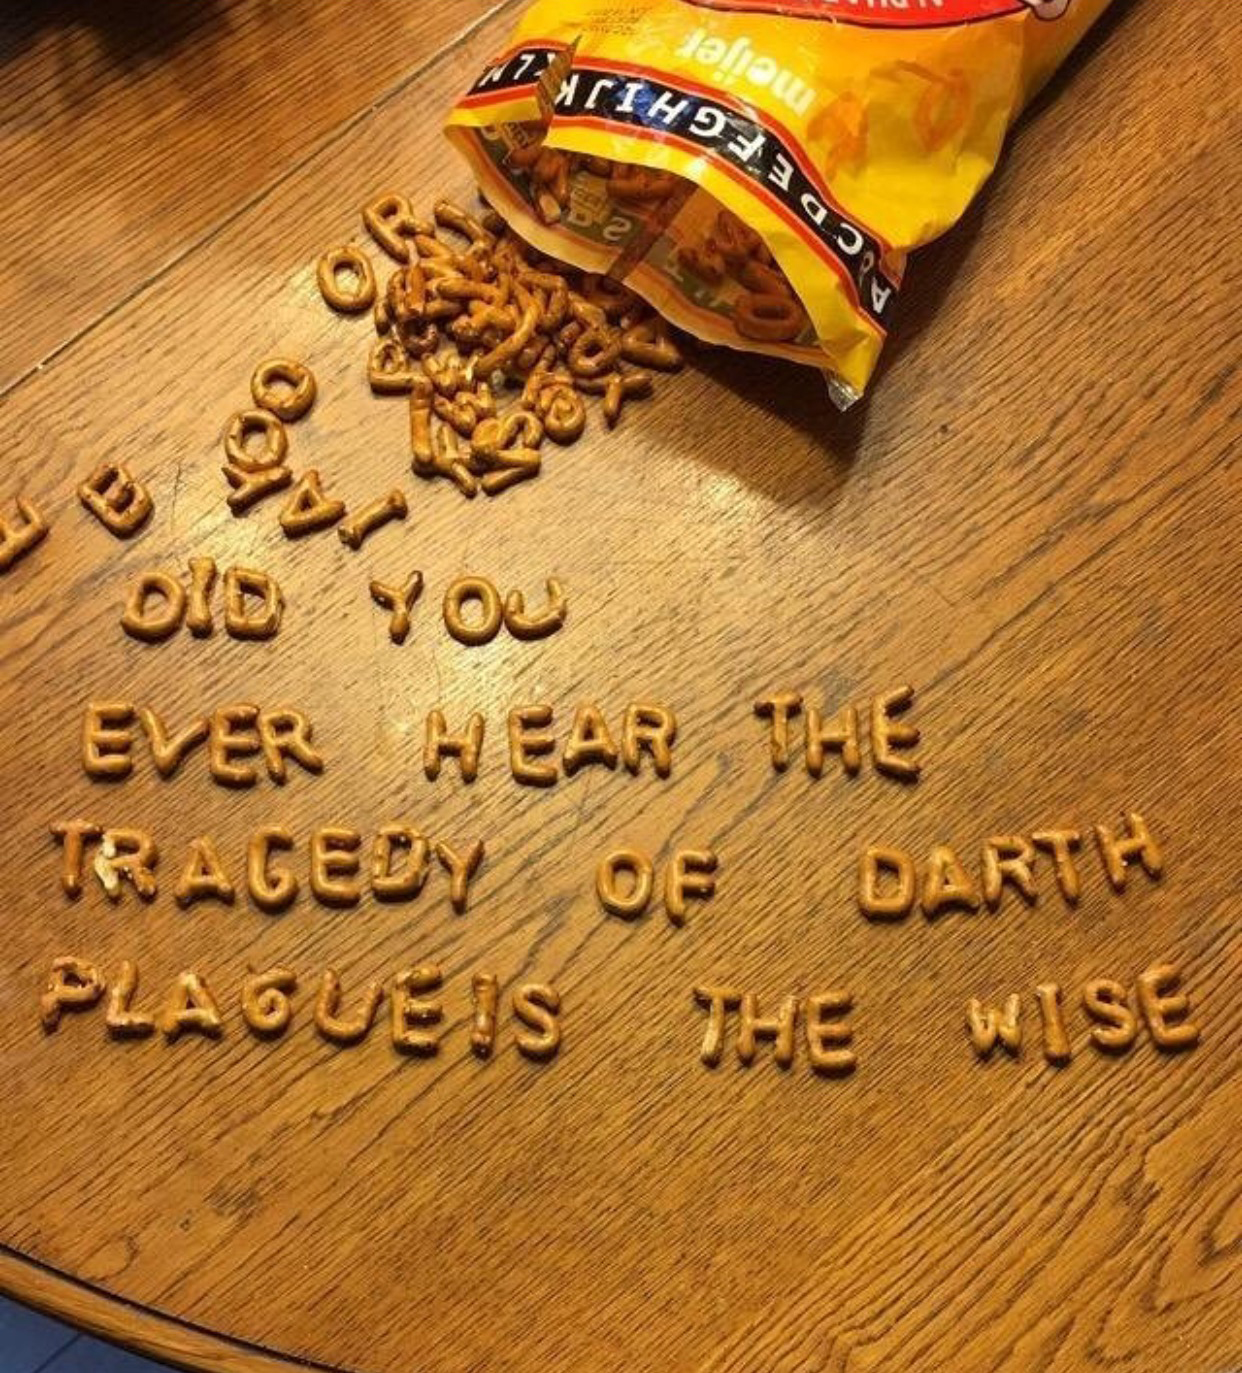 message written out in alphabet pretzels of OLD YOU EVER HEAR THE TRAGEDY OF DARTH PLAGUEis THE WISE the Star Wars meme.